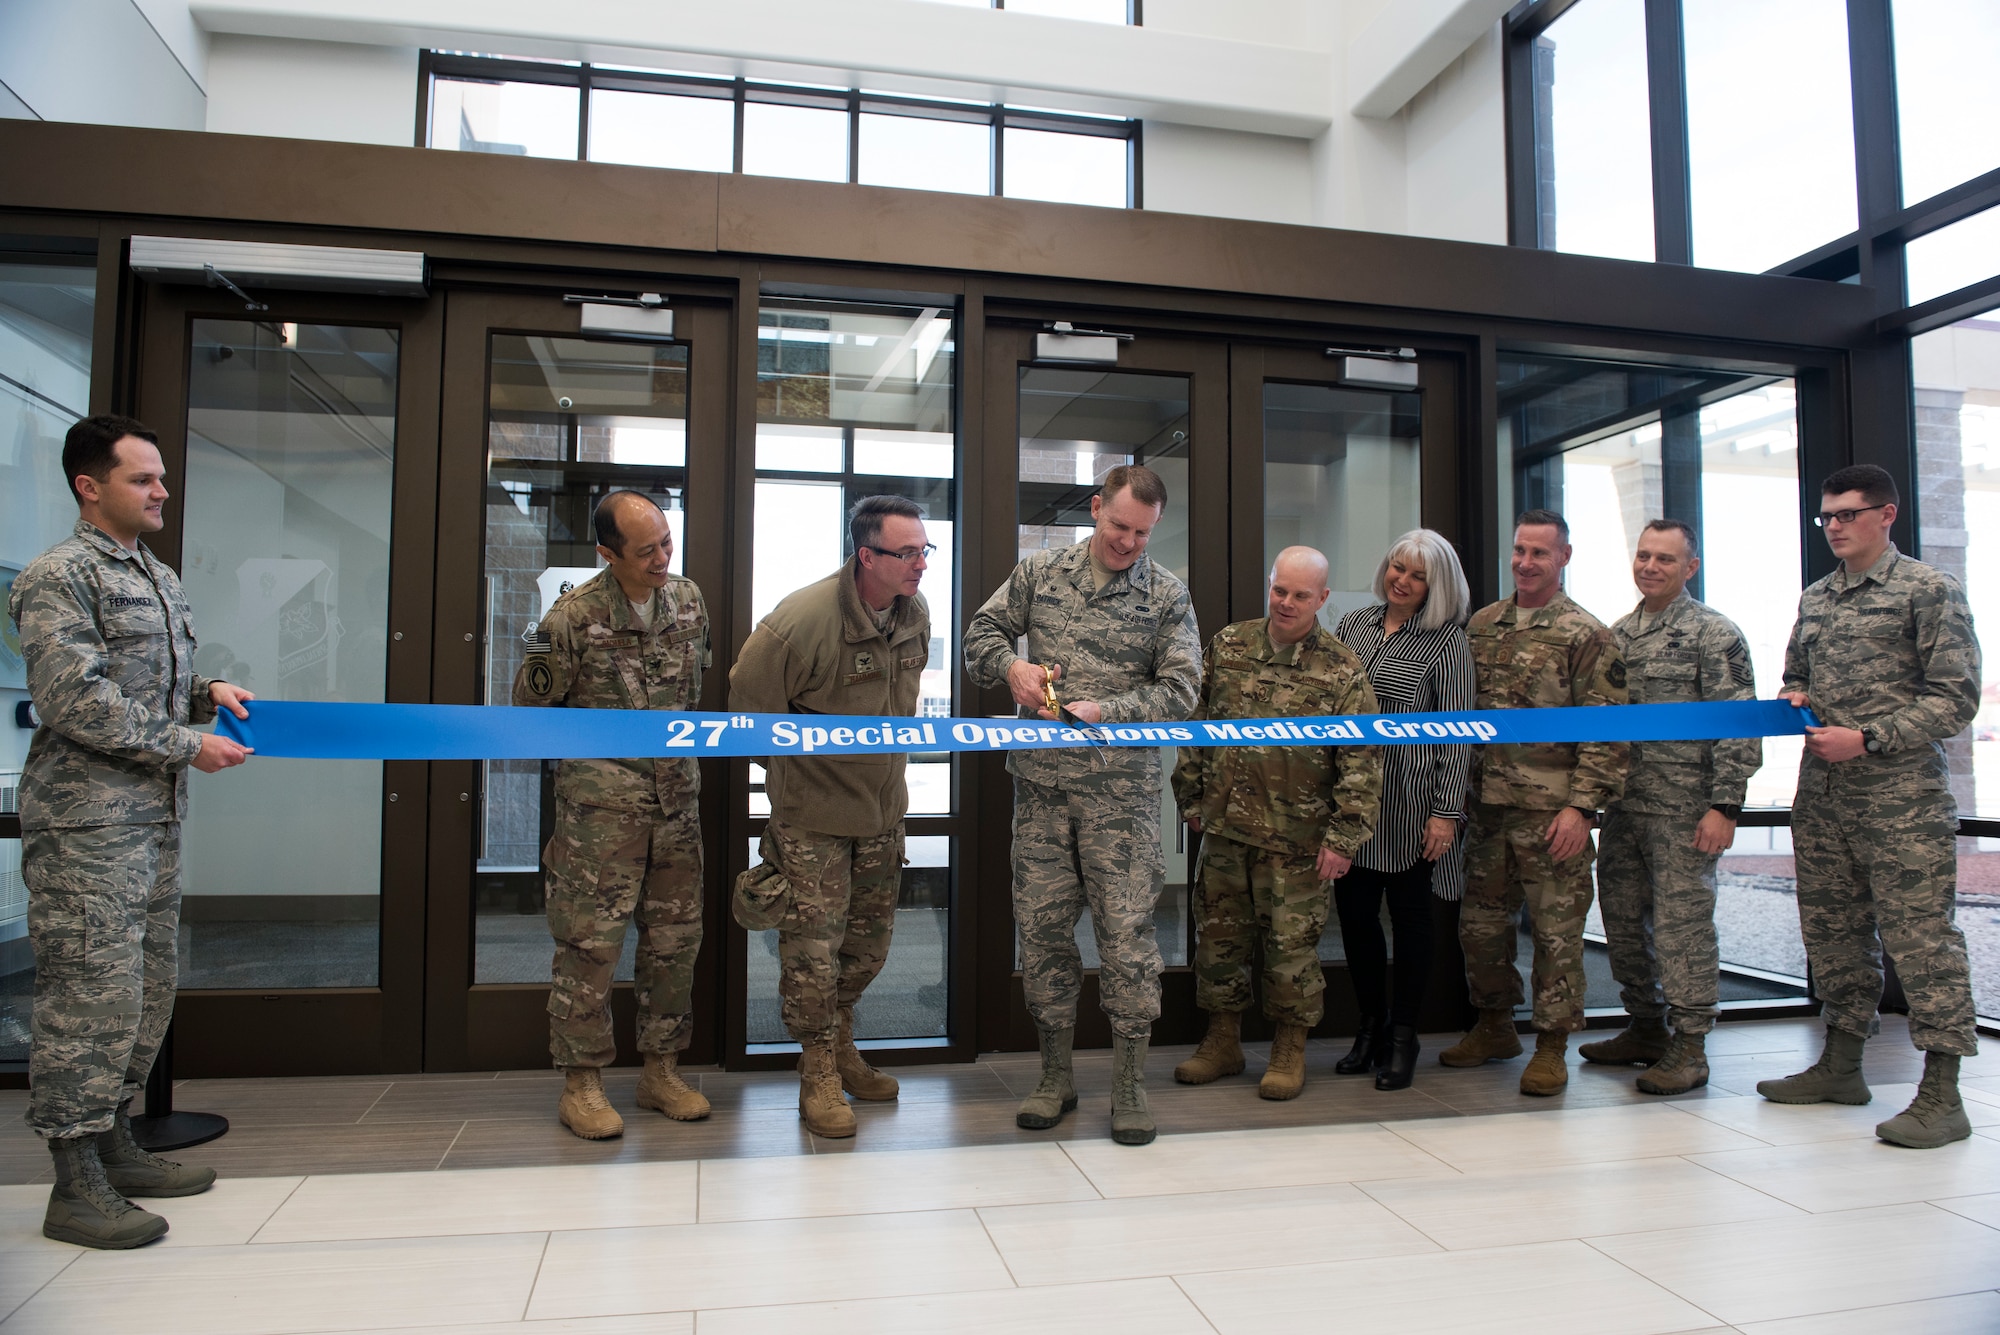 Col. Christopher Patrick, 27th Special Operations Medical Group commander, cuts the formal ribbon during the 27th SOMDG building ribbon cutting ceremony at Cannon AFB, N.M., Feb. 23, 2018. The upgrade to the new medical group facility is just one more way that Cannon is committed to being a premier installation. (U.S. Air Force photo by Staff Sgt. Michael Washburn/Released)